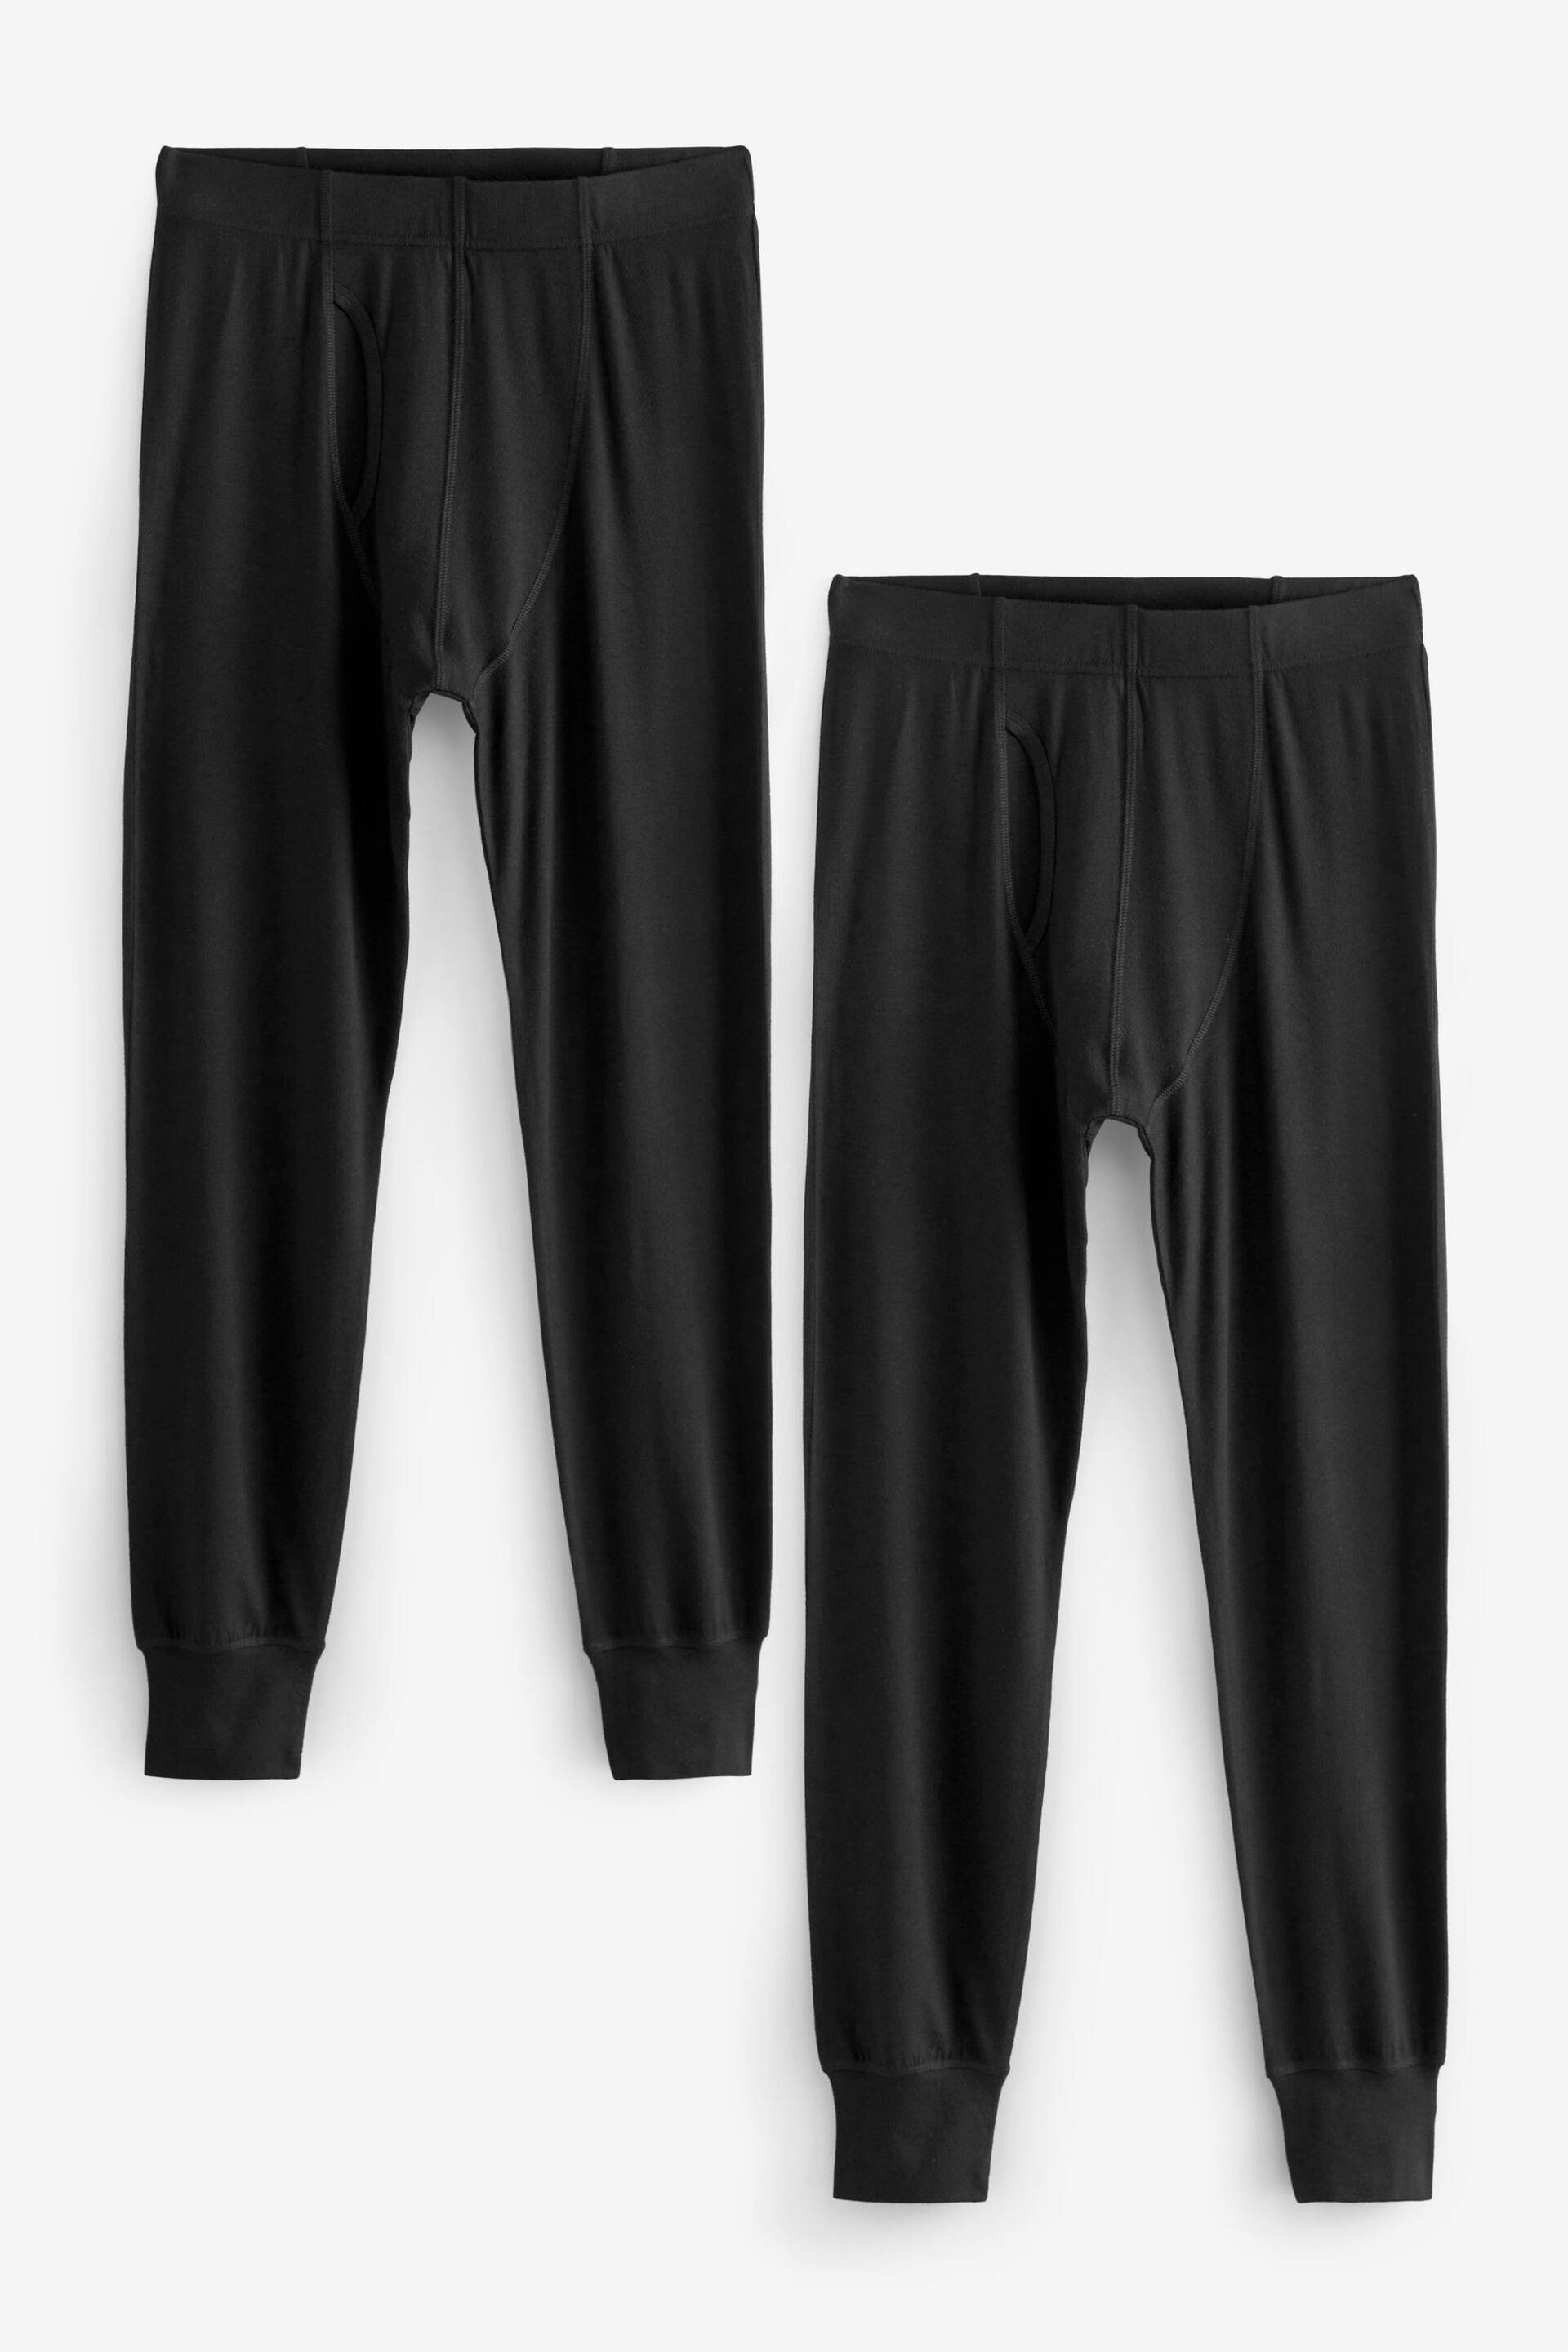 Black 2 Pack Lightweight Thermal Long Johns - Image 1 of 8